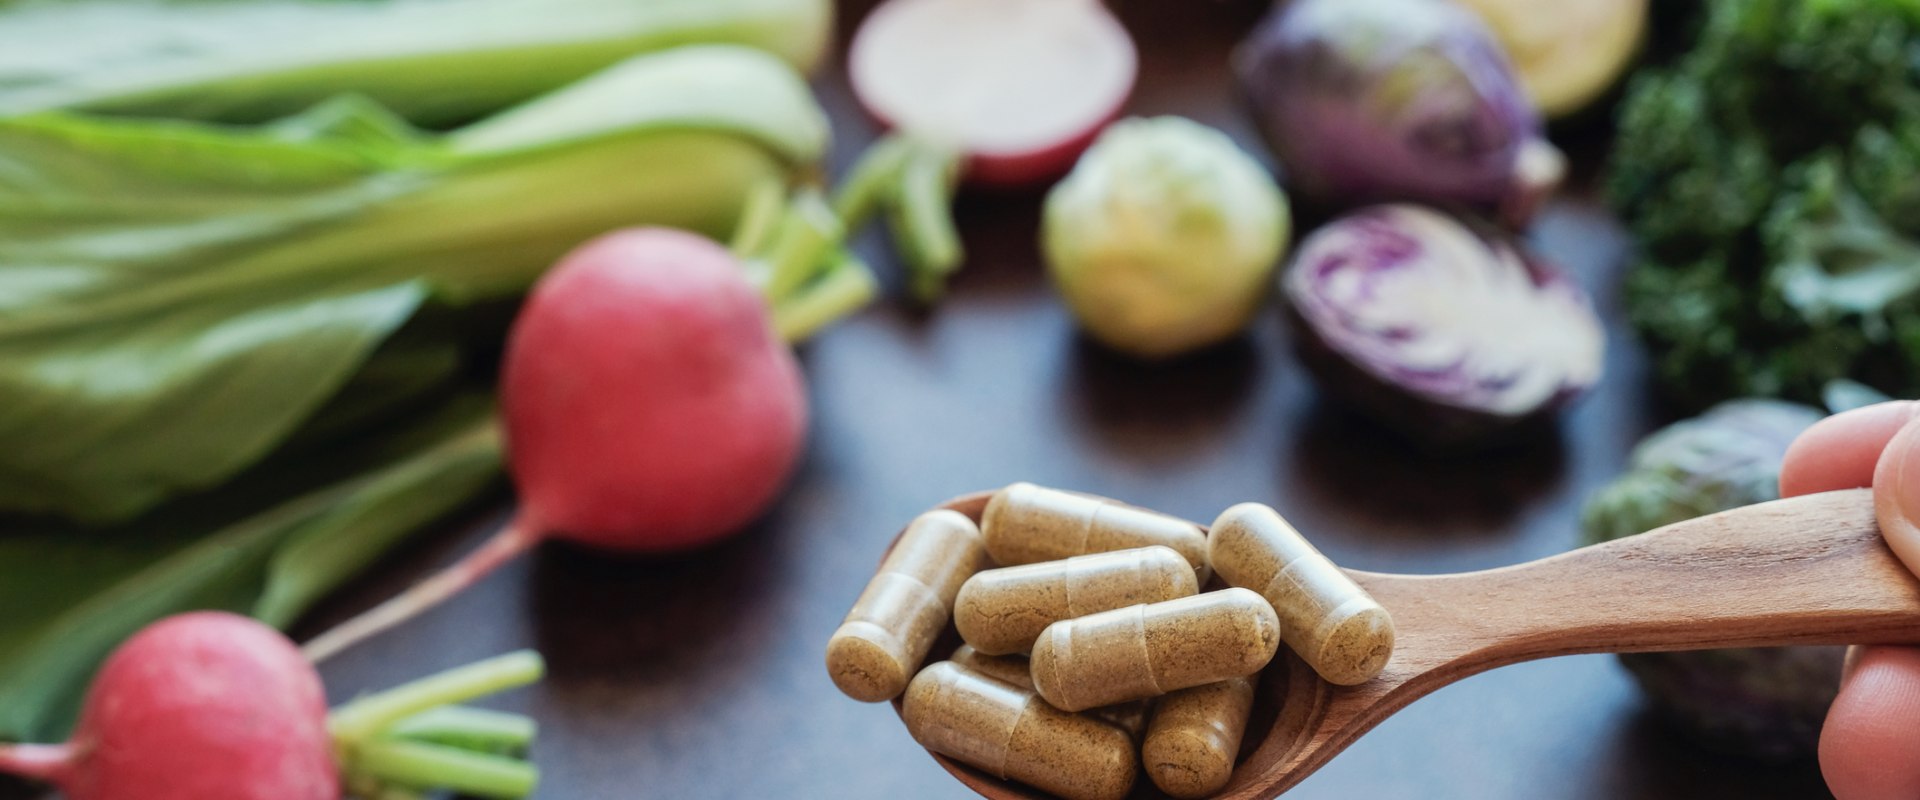 How to Choose the Right Supplements for Your Health and Stay Safe